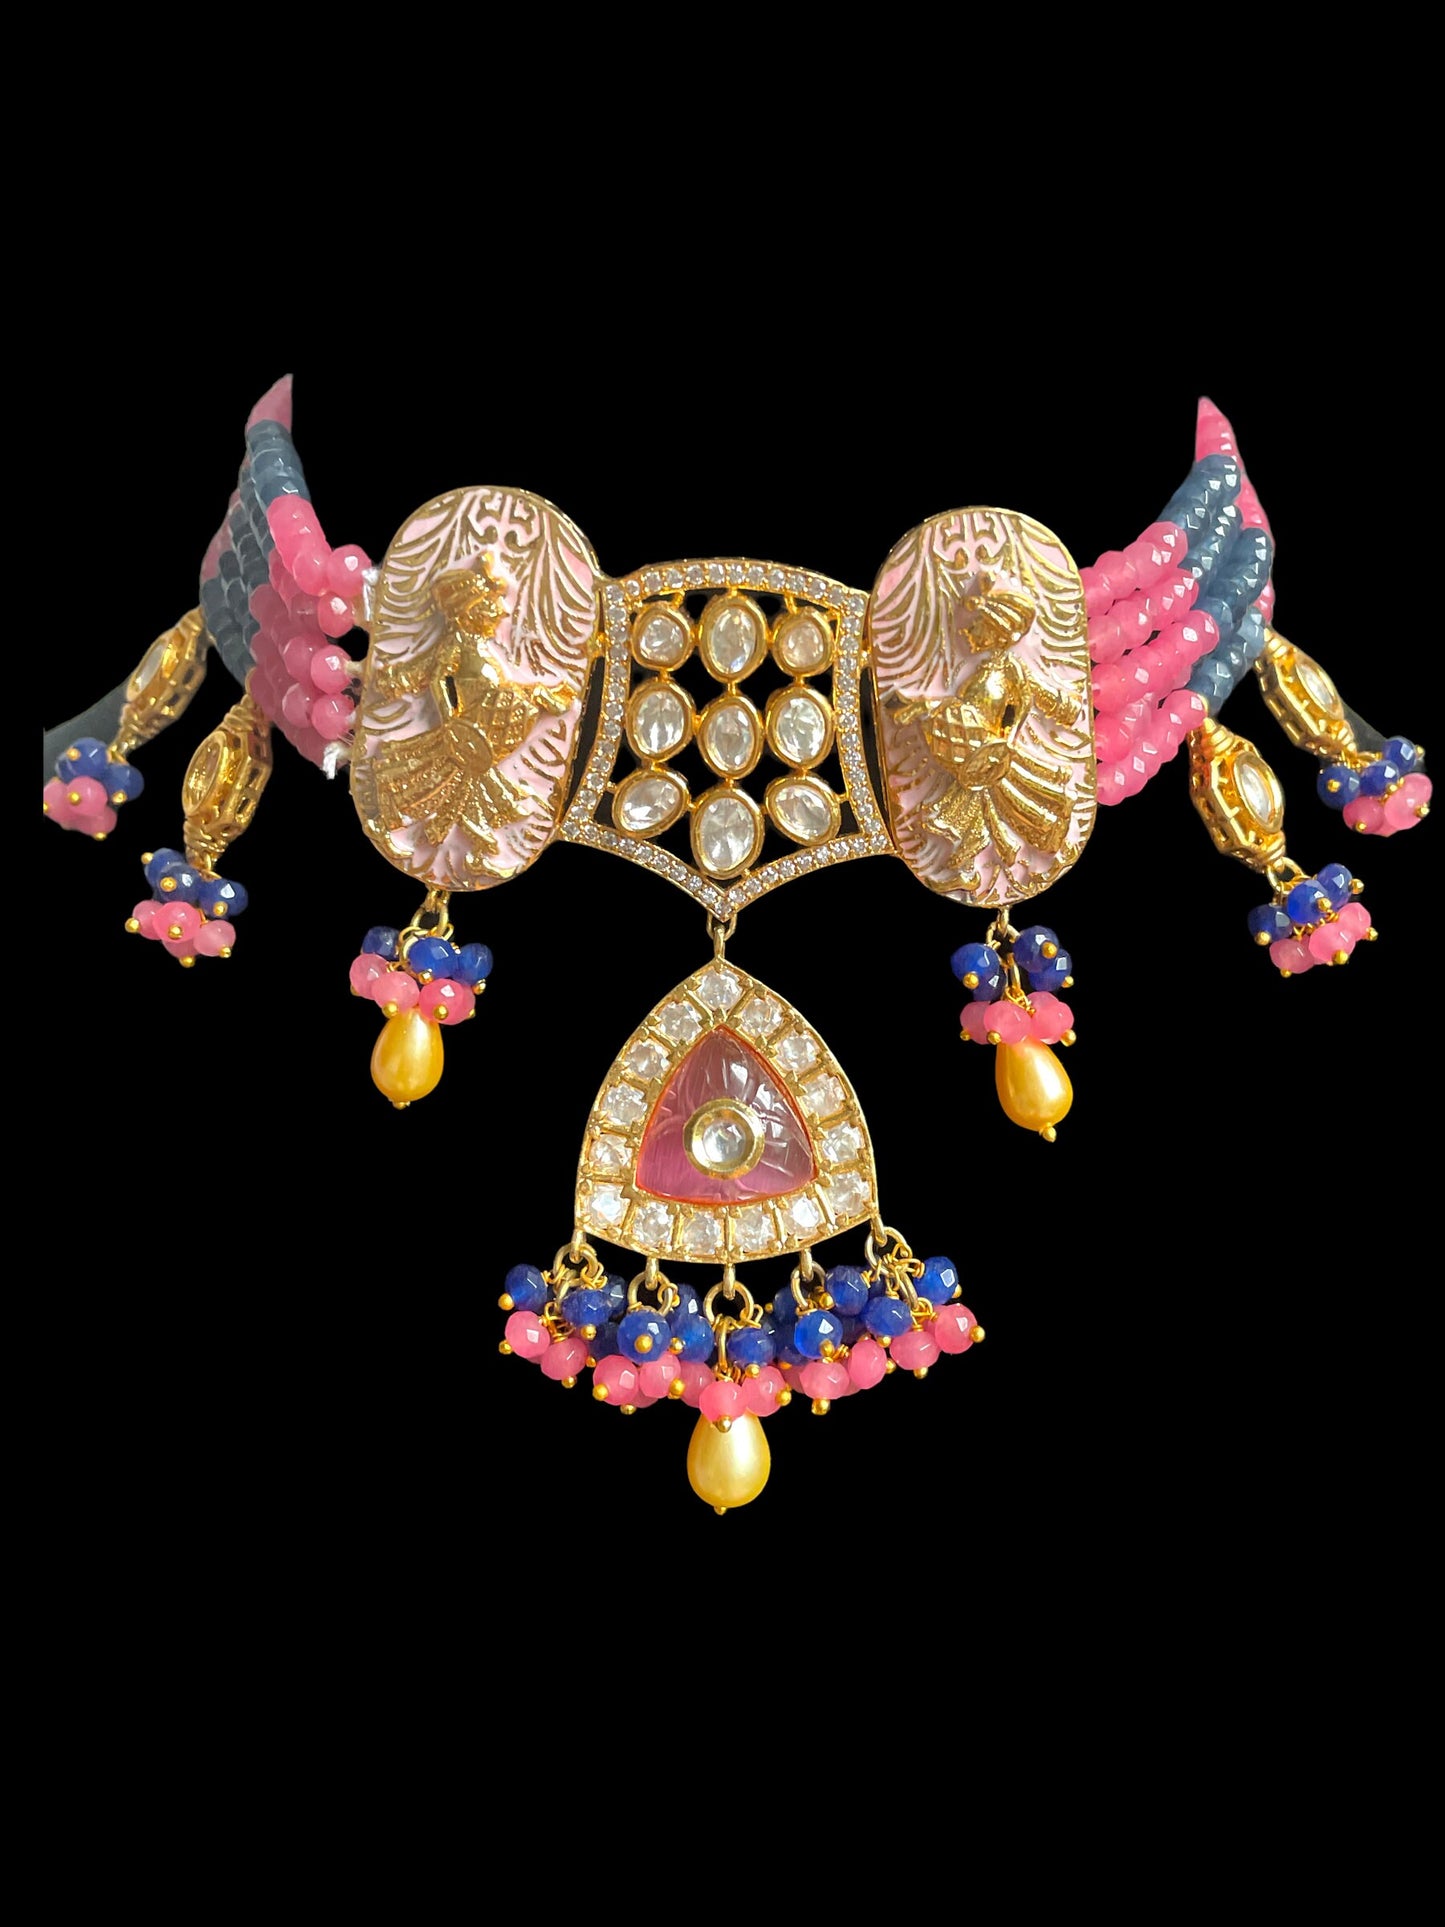 Rajasthani Jewelry/Meenakari Necklace/Indian Bollywood Jewelry/Jaipur Necklace/Mehendi Jewelry/Bright Unique Indian Necklace with jhumka set